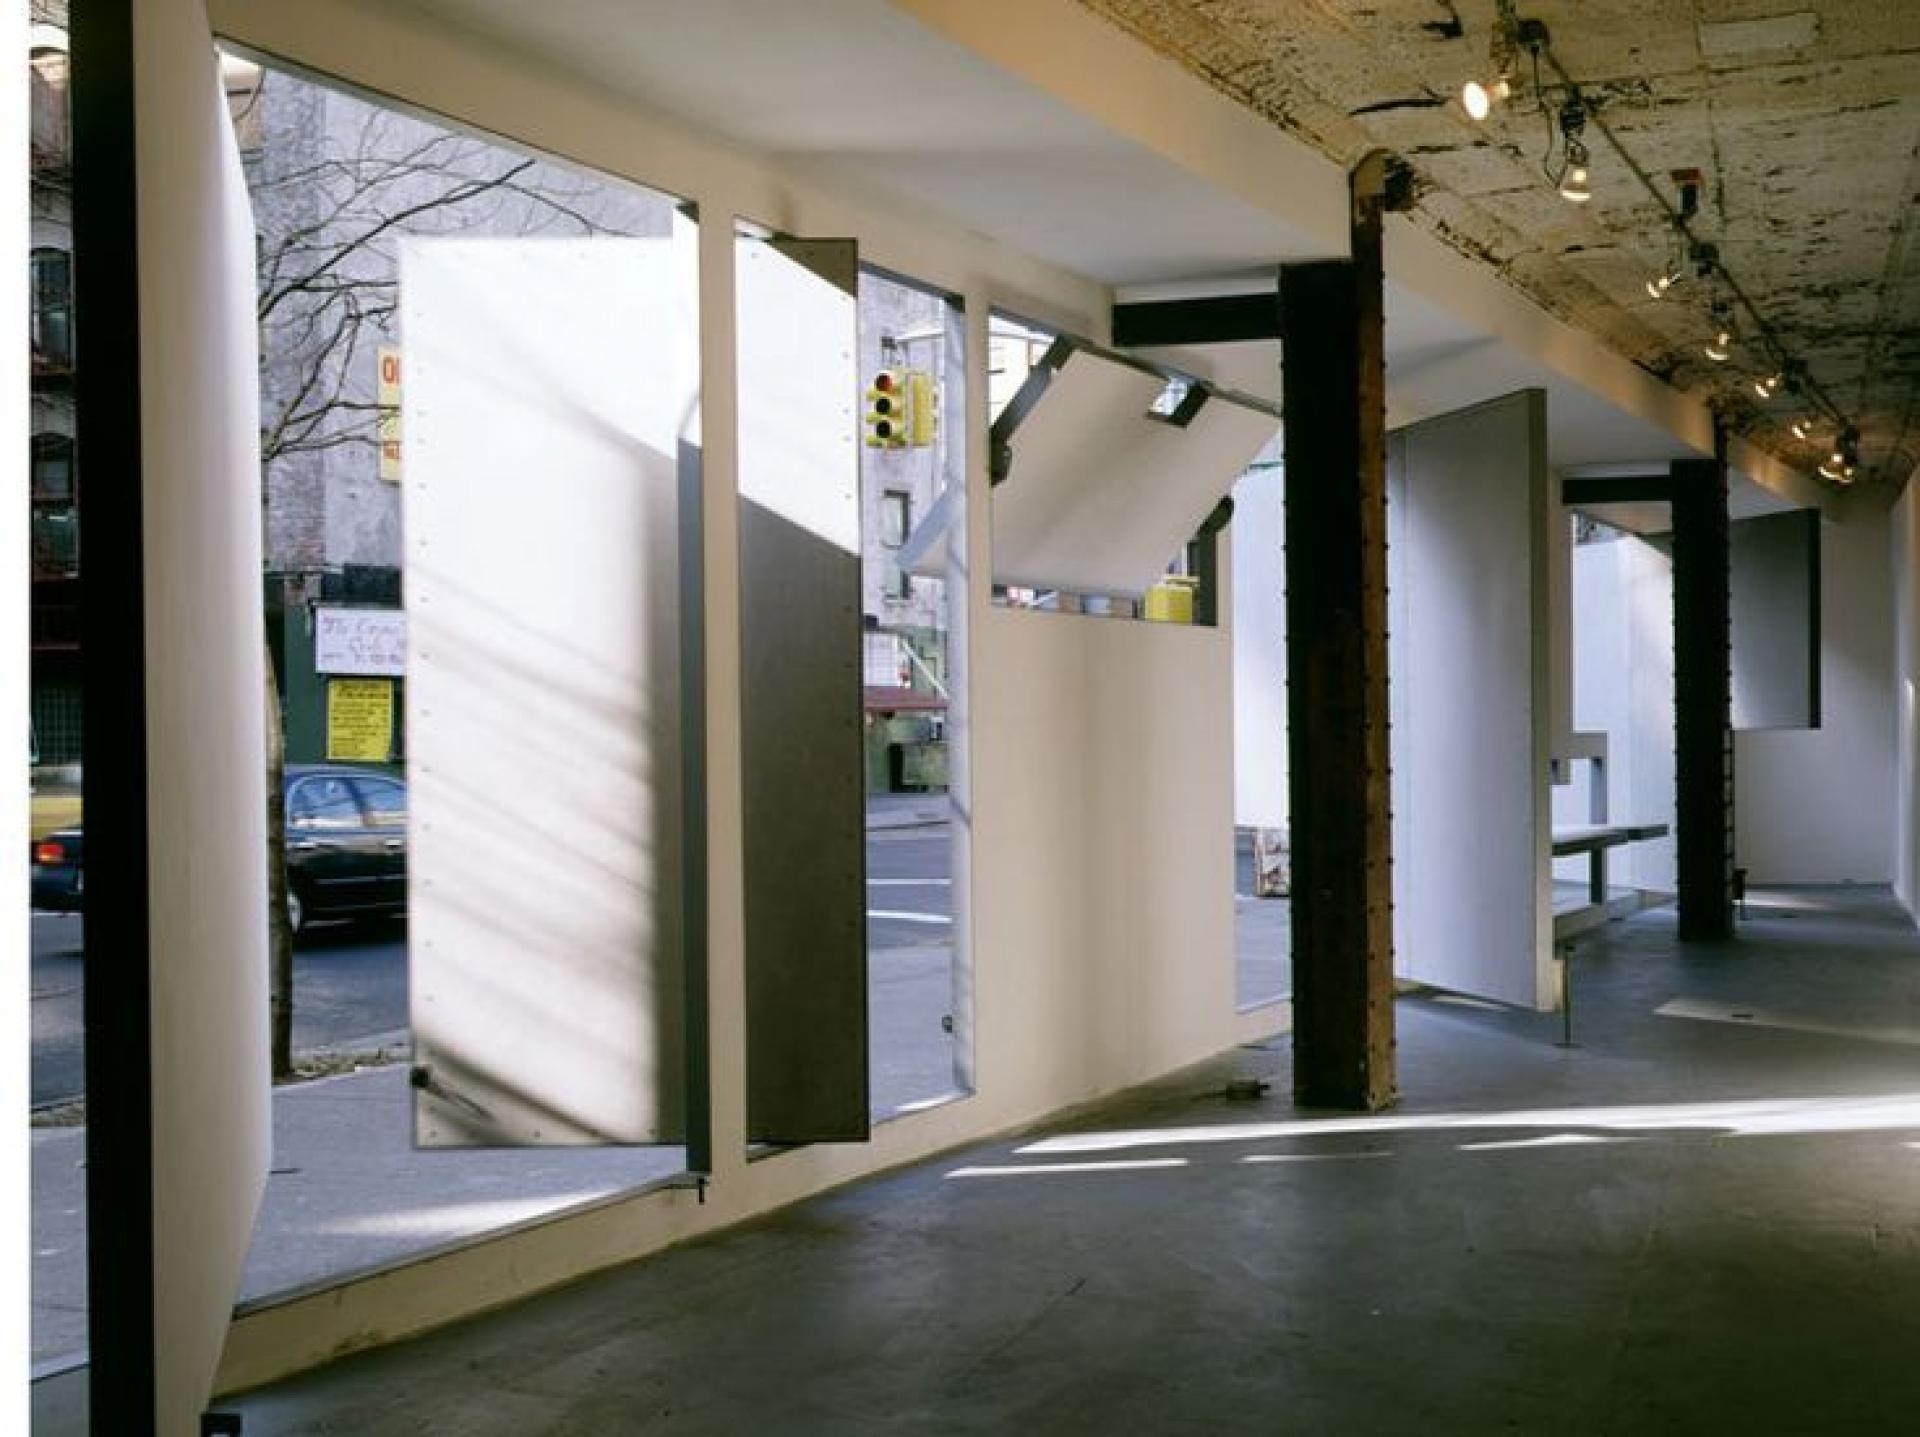 At Storefront (1993), panels can be rotated to articulate an intimate interior venue or open to the New York street and its cacophony. | Photo via Paul Warchol